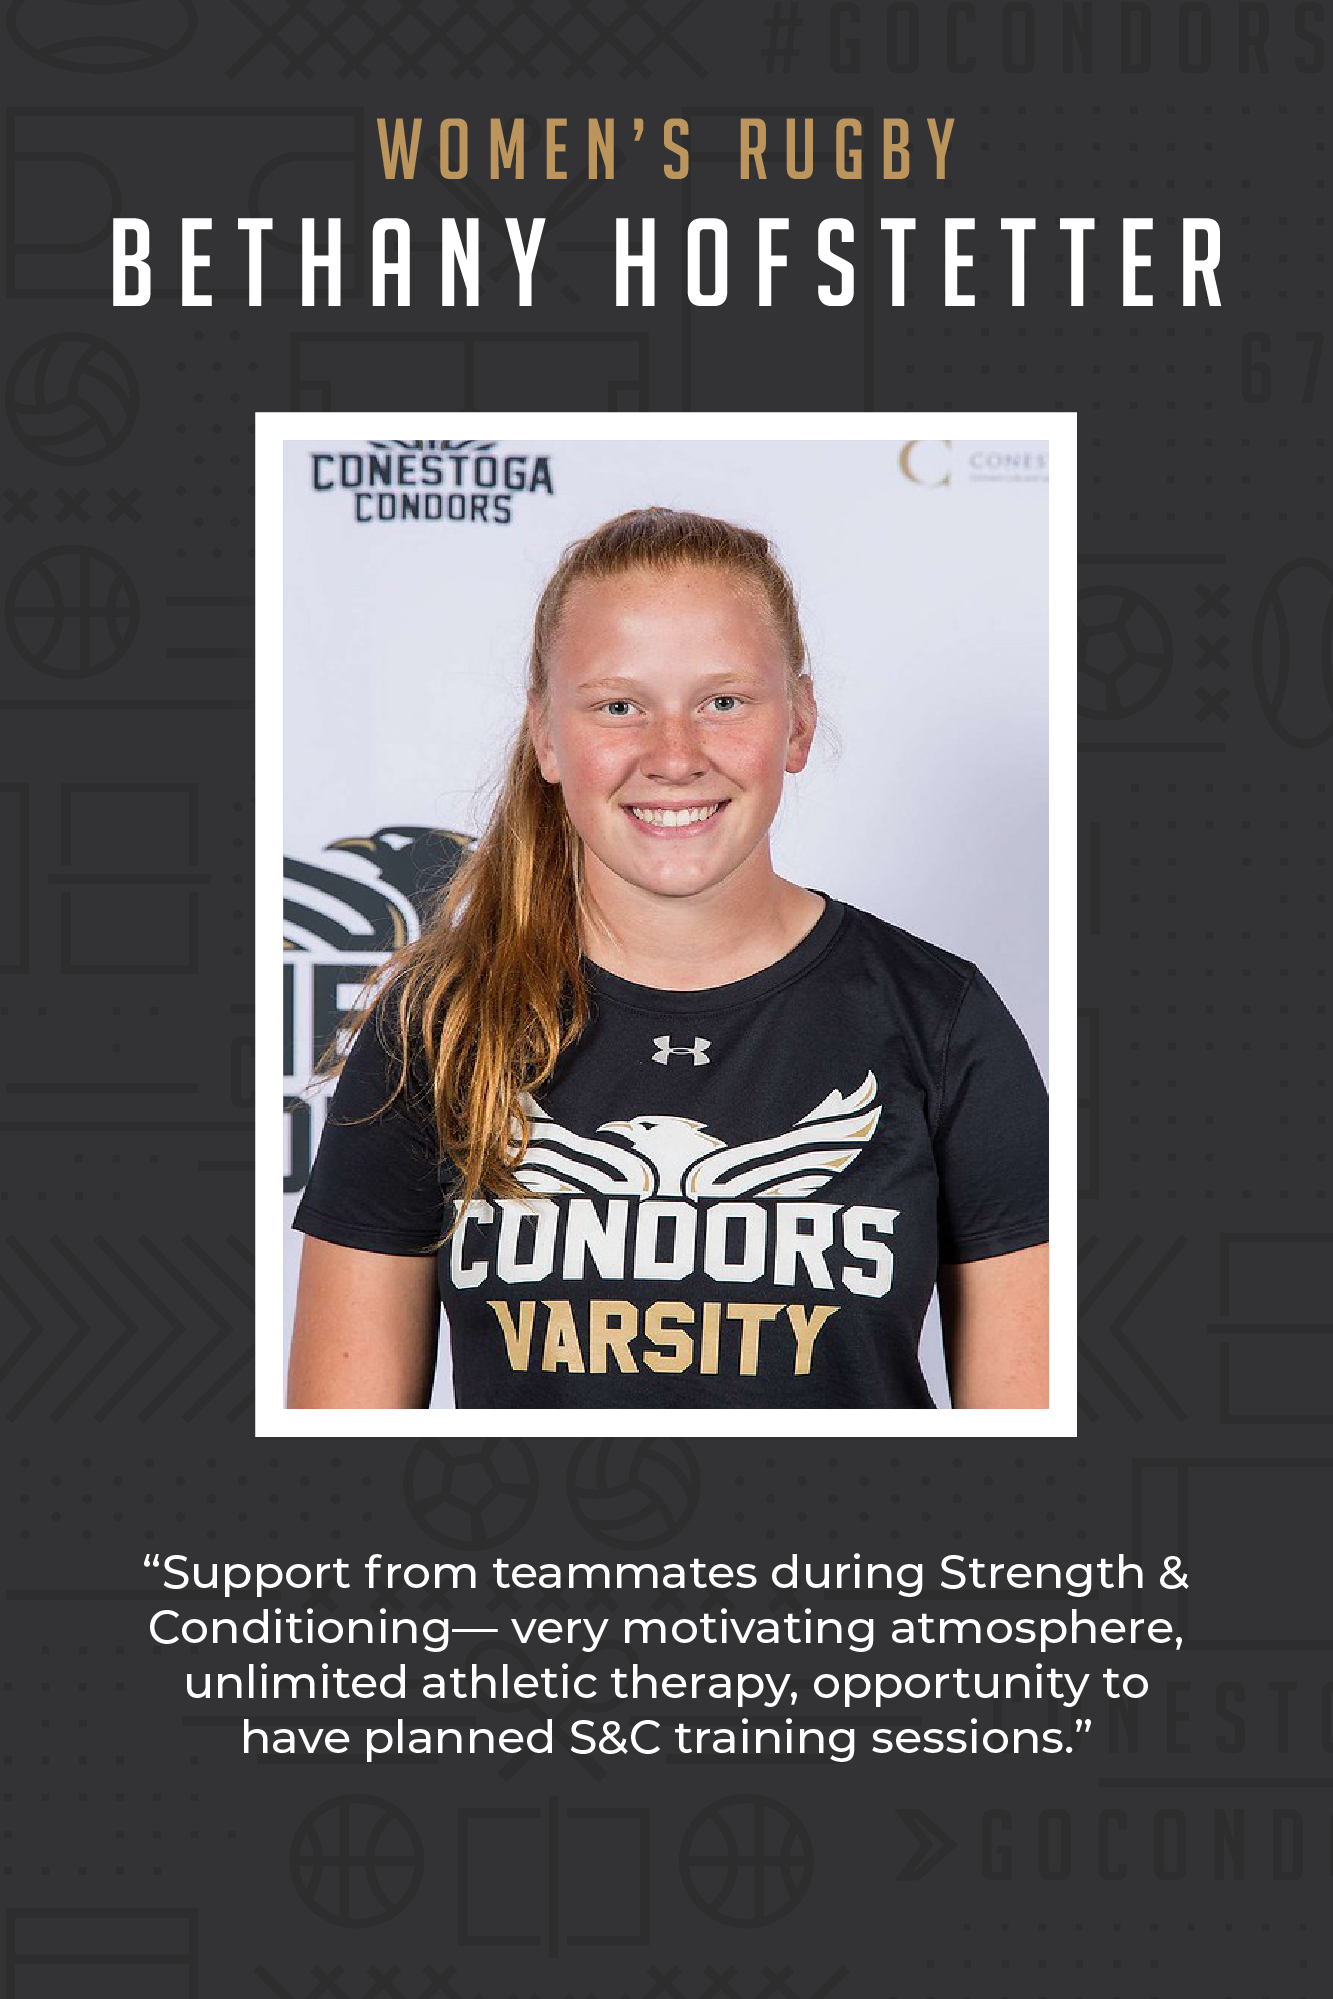 Varsity athlete Bethany's testimonial about support from teammates during strength & conditioning, motivating atmosphere and unlimited athletic therapy.